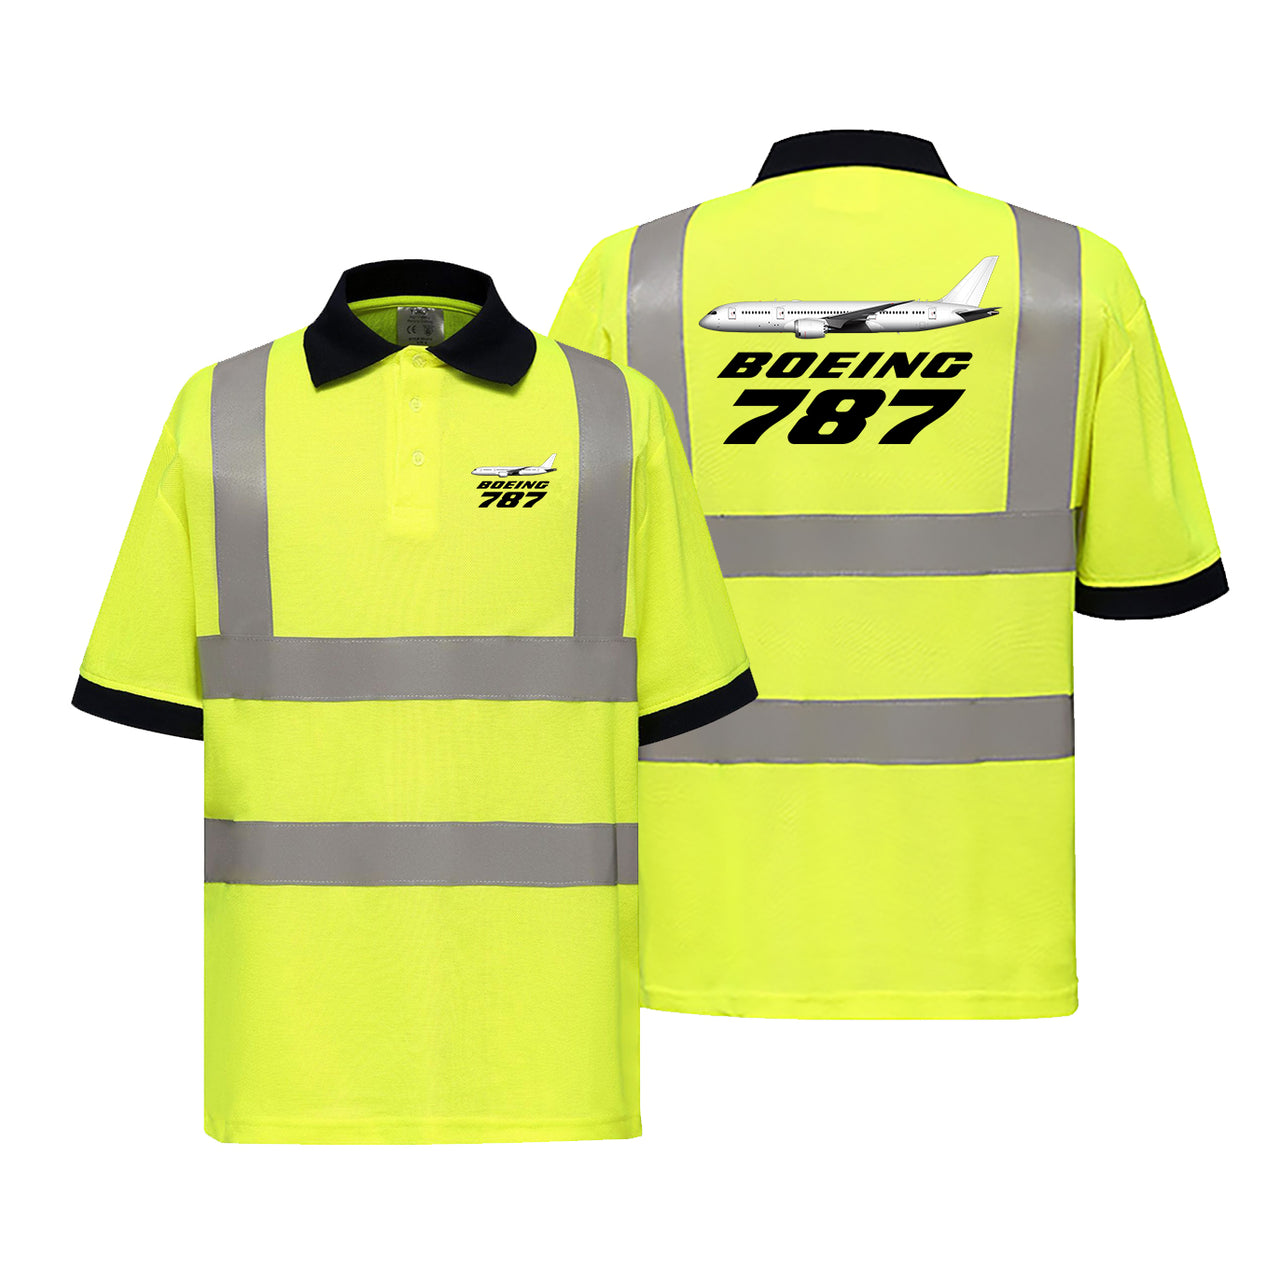 The Boeing 787 Designed Reflective Polo T-Shirts